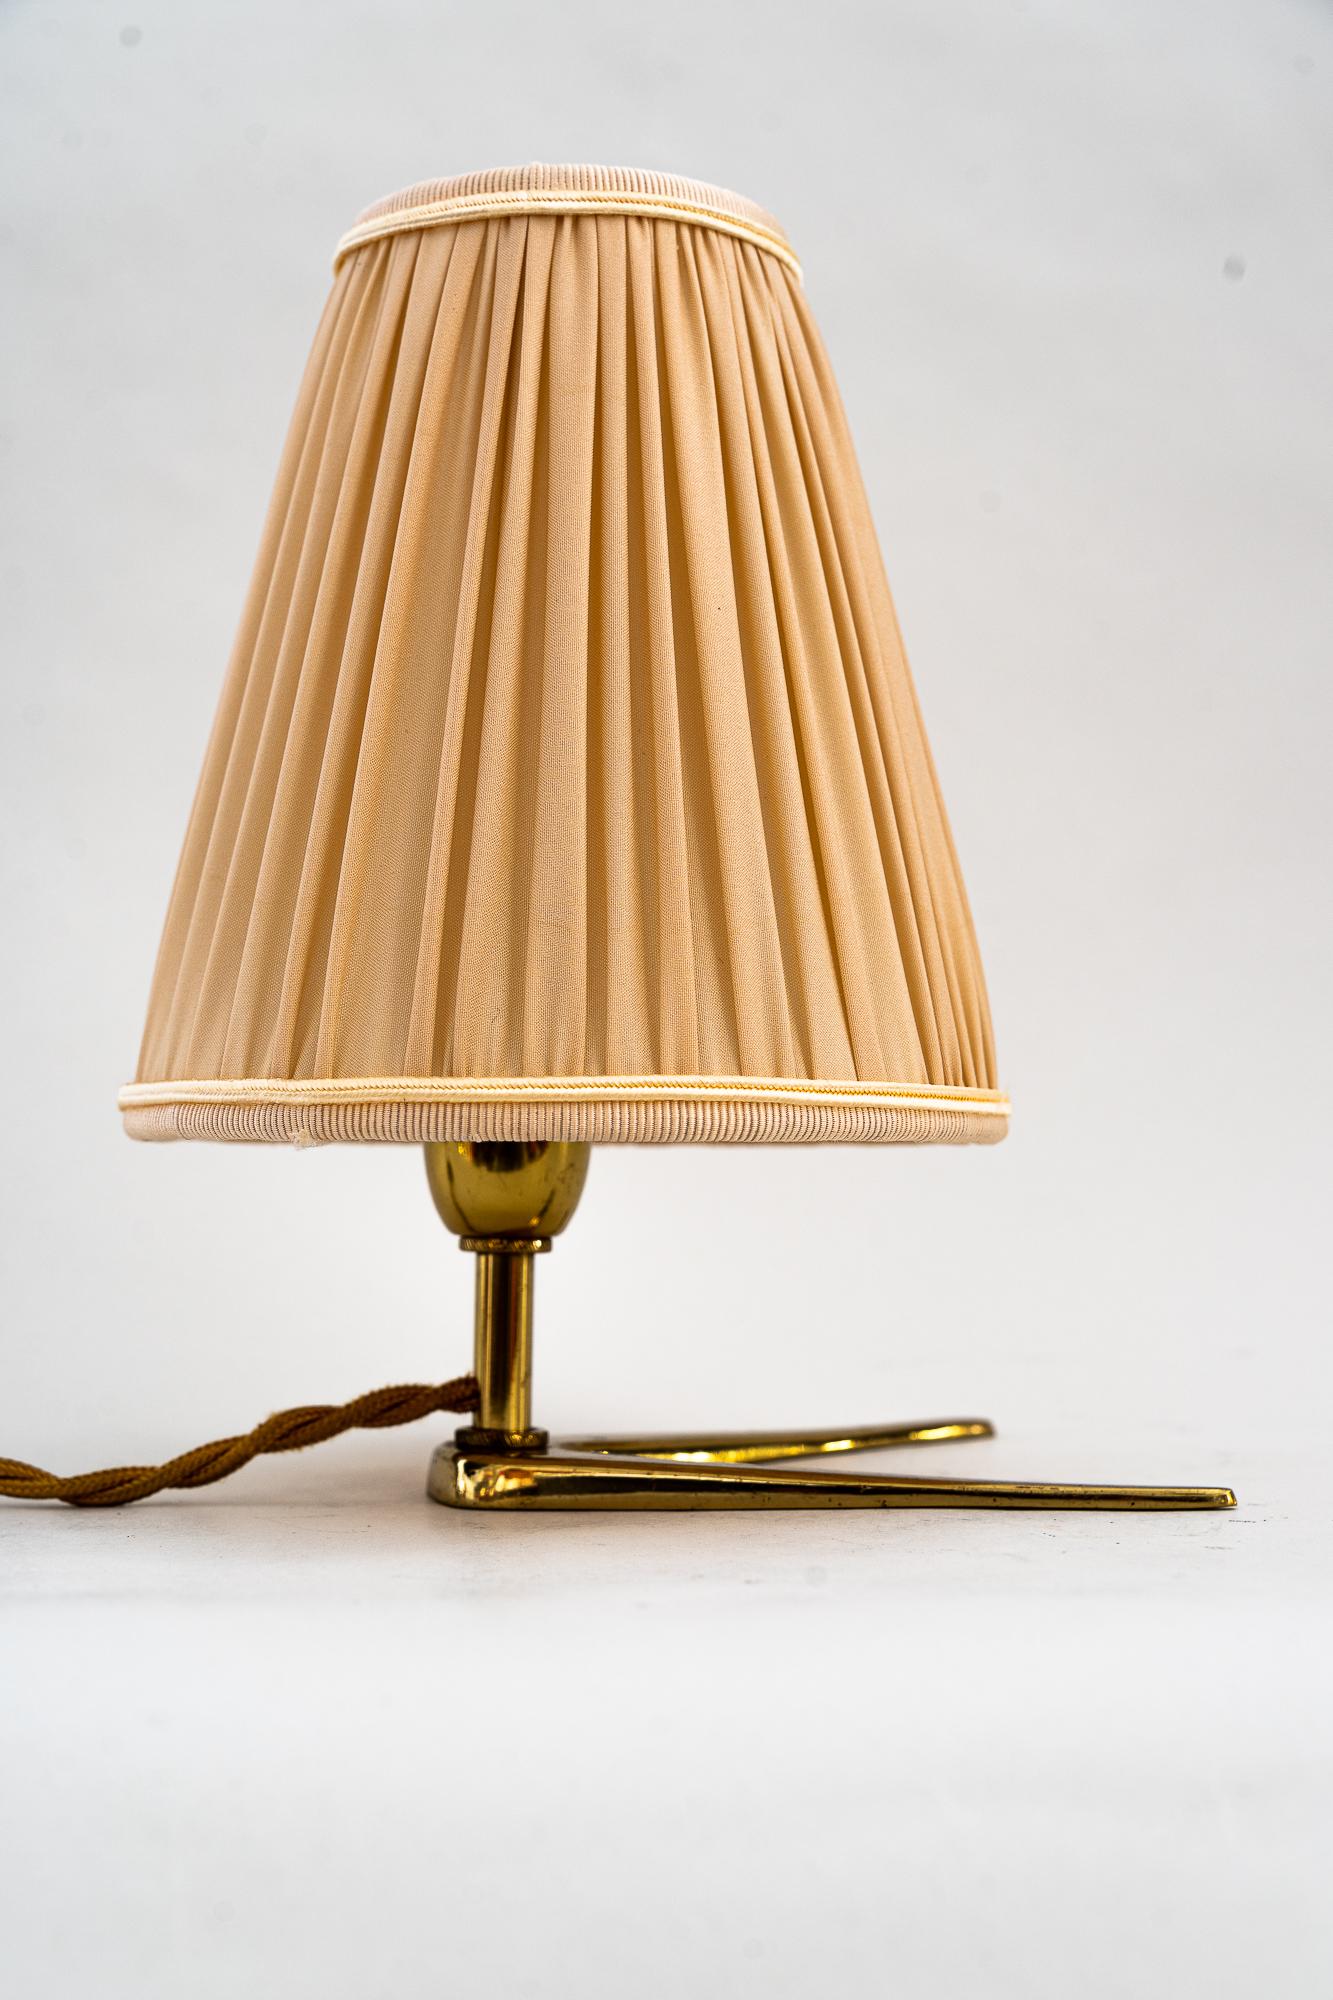 Rupert Nikoll table lamp vienna around 1950s
Polished and stove enameled.